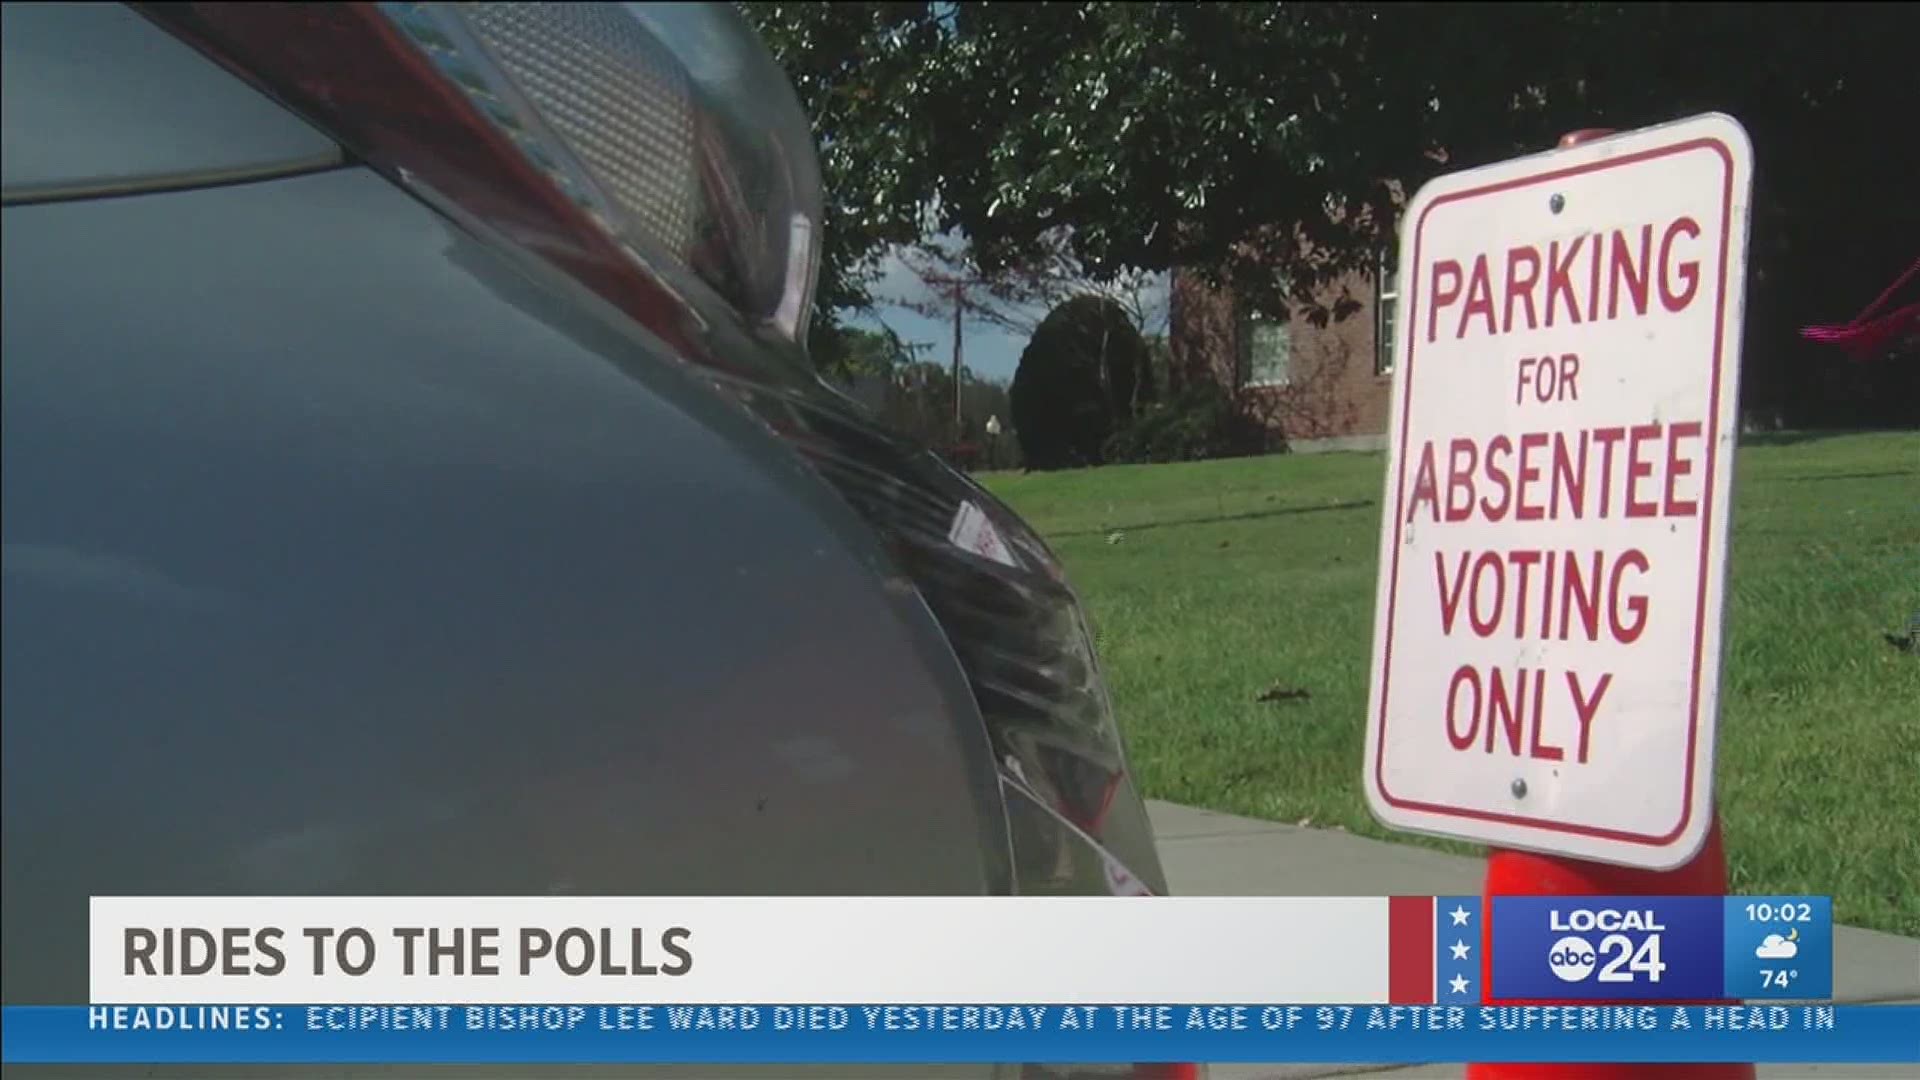 For some people in DeSoto County, simply getting to the polls to cast their ballot is an ongoing challenge.